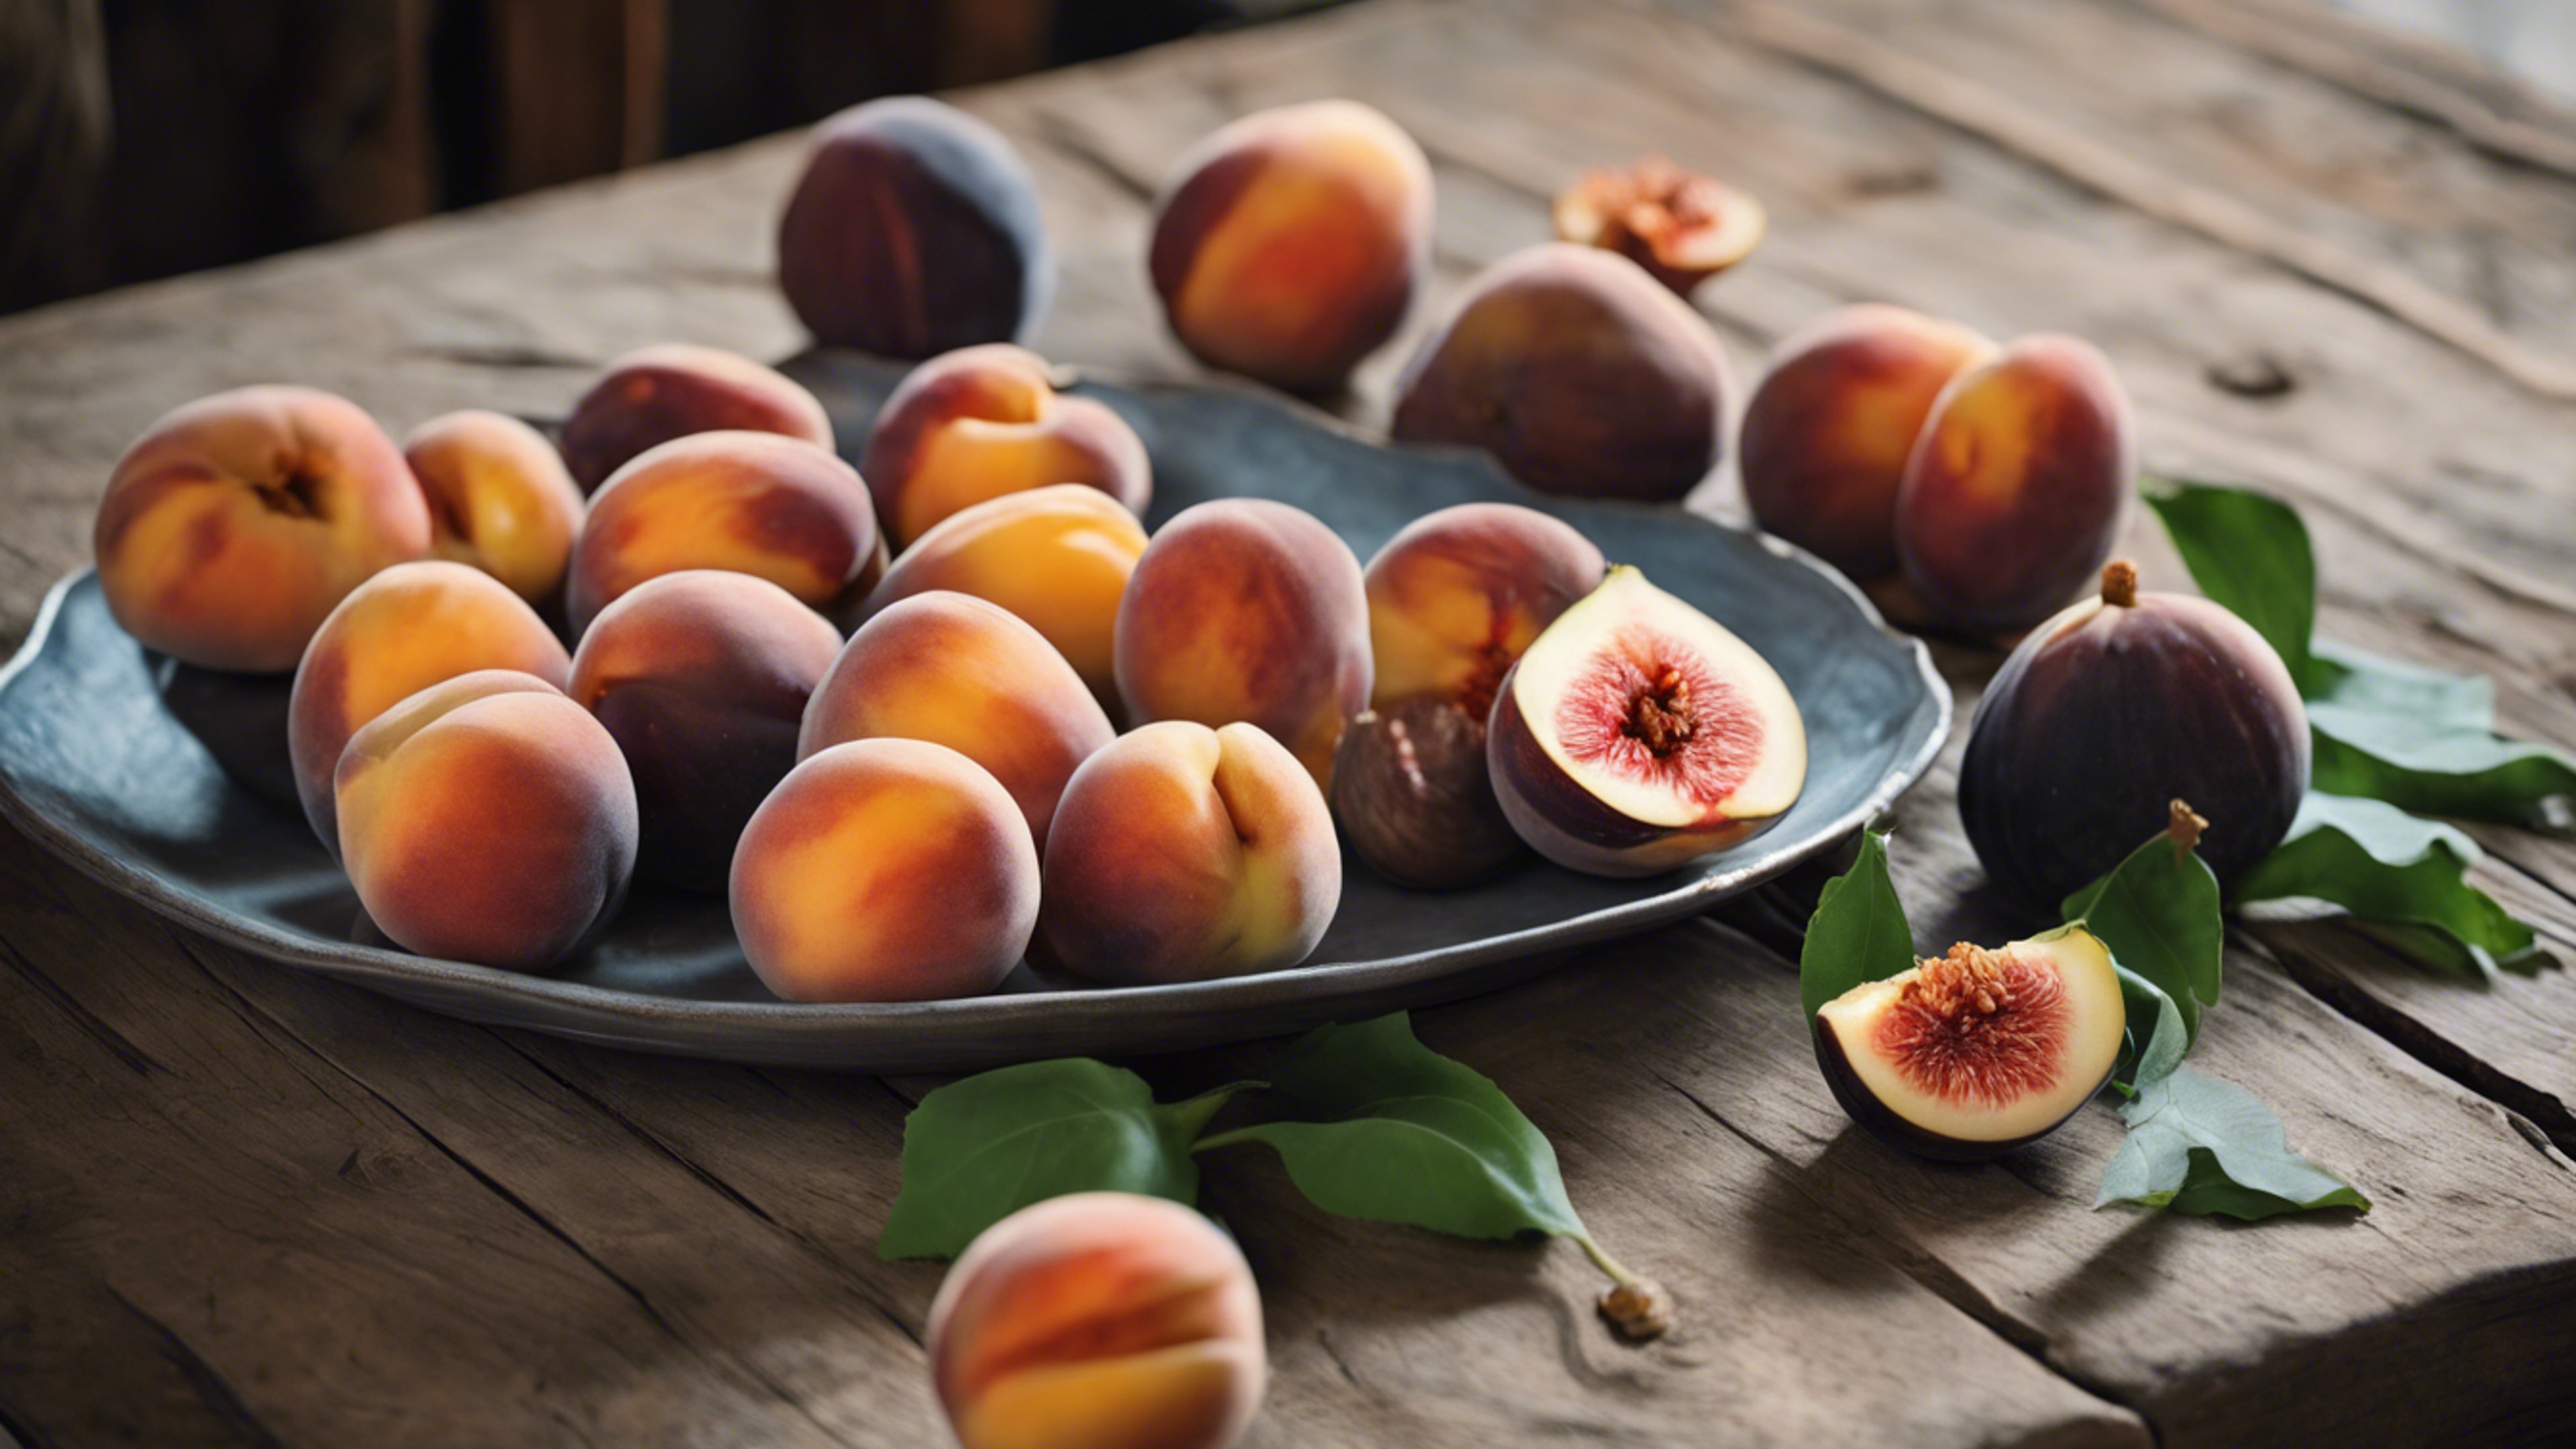 Still life of peaches and figs arranged beautifully on a rustic wooden table.壁紙[c31d3ce6096543dcac89]